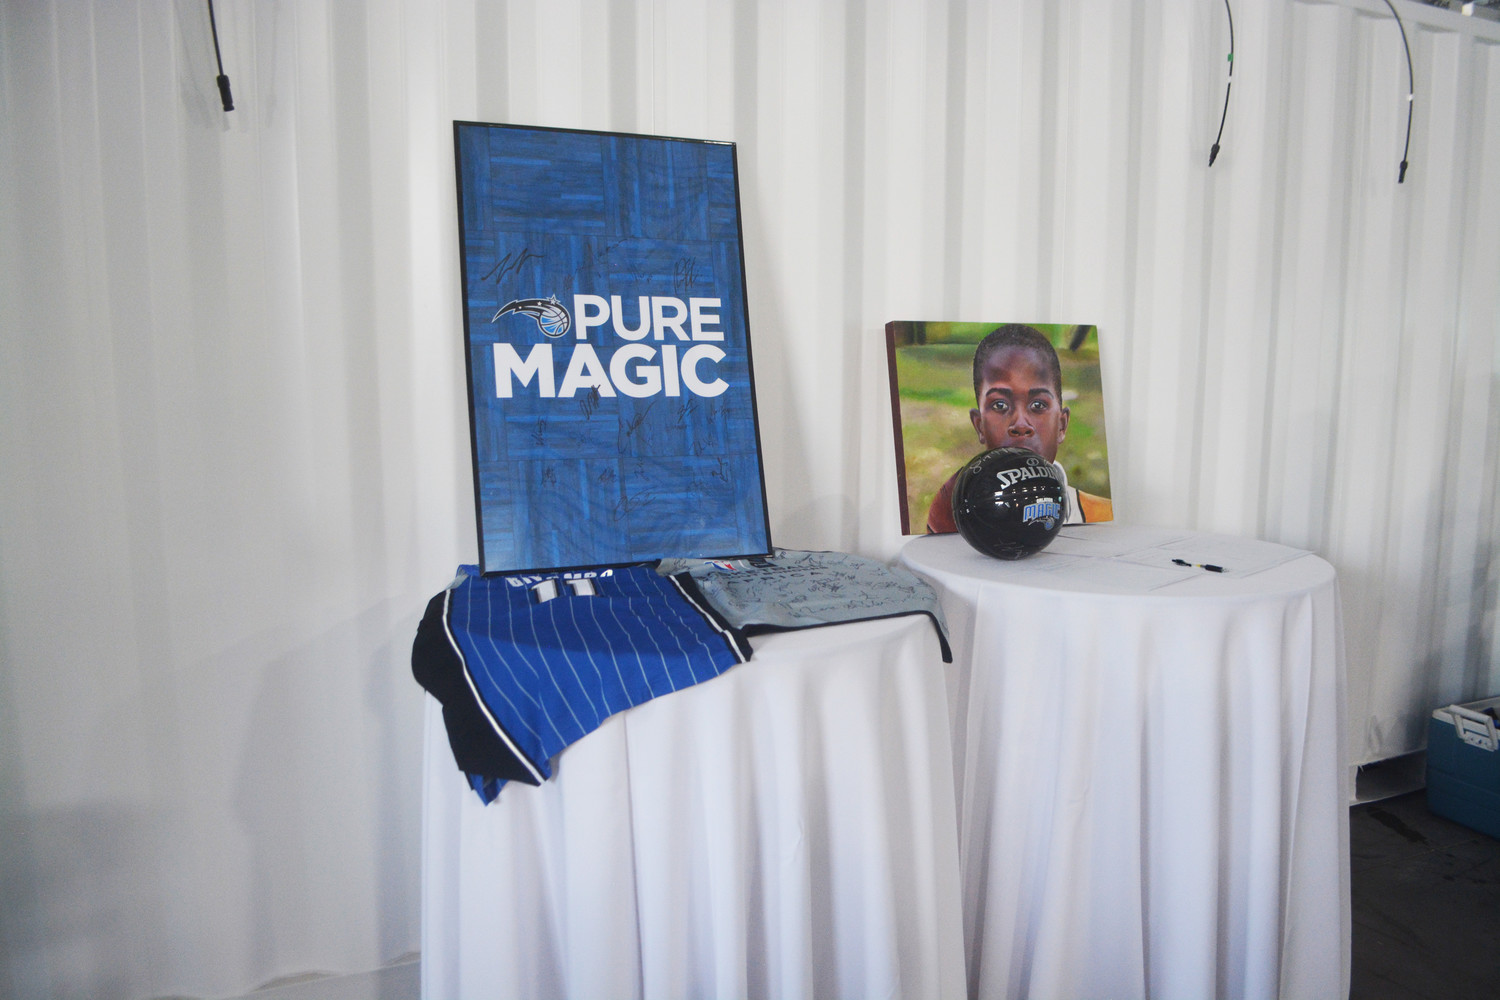 Orlando Magic memorabilia was auctioned off at the fundraising event to support Biyombo's effort to provide health services to the Congo.